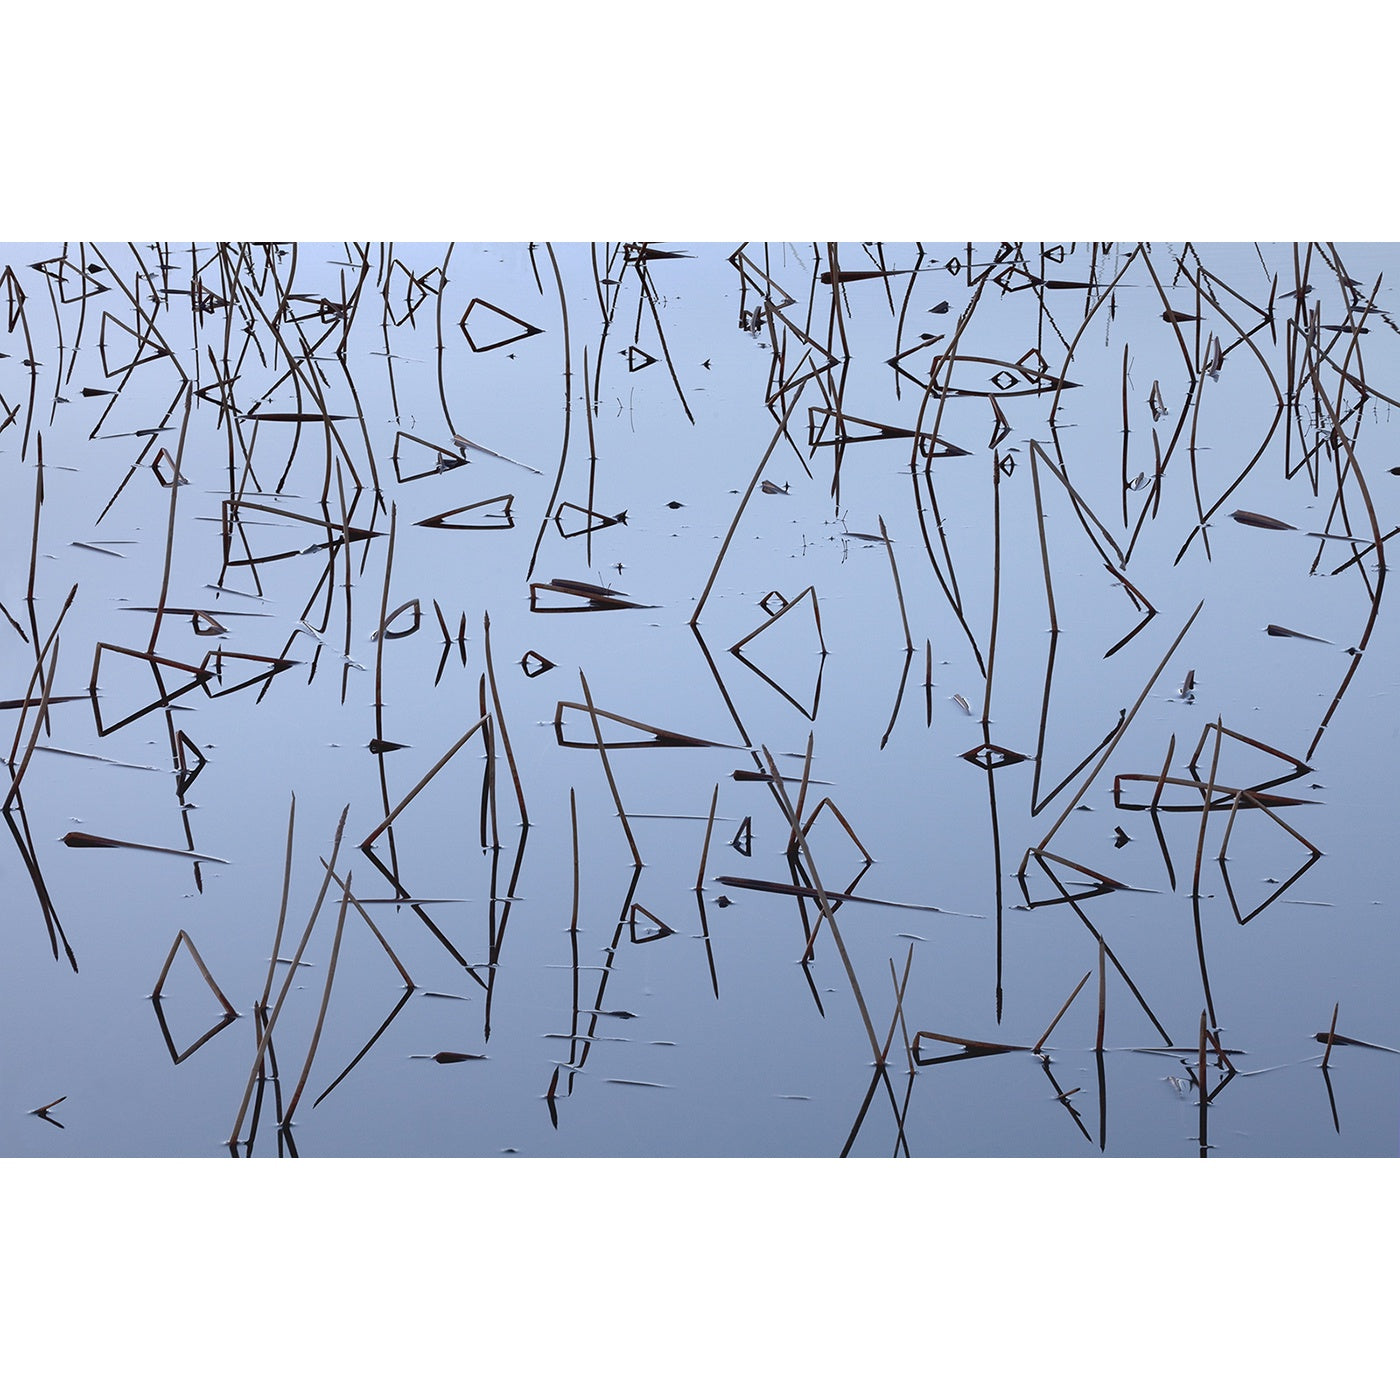 Chris Bell – Reeds and Reflections 2